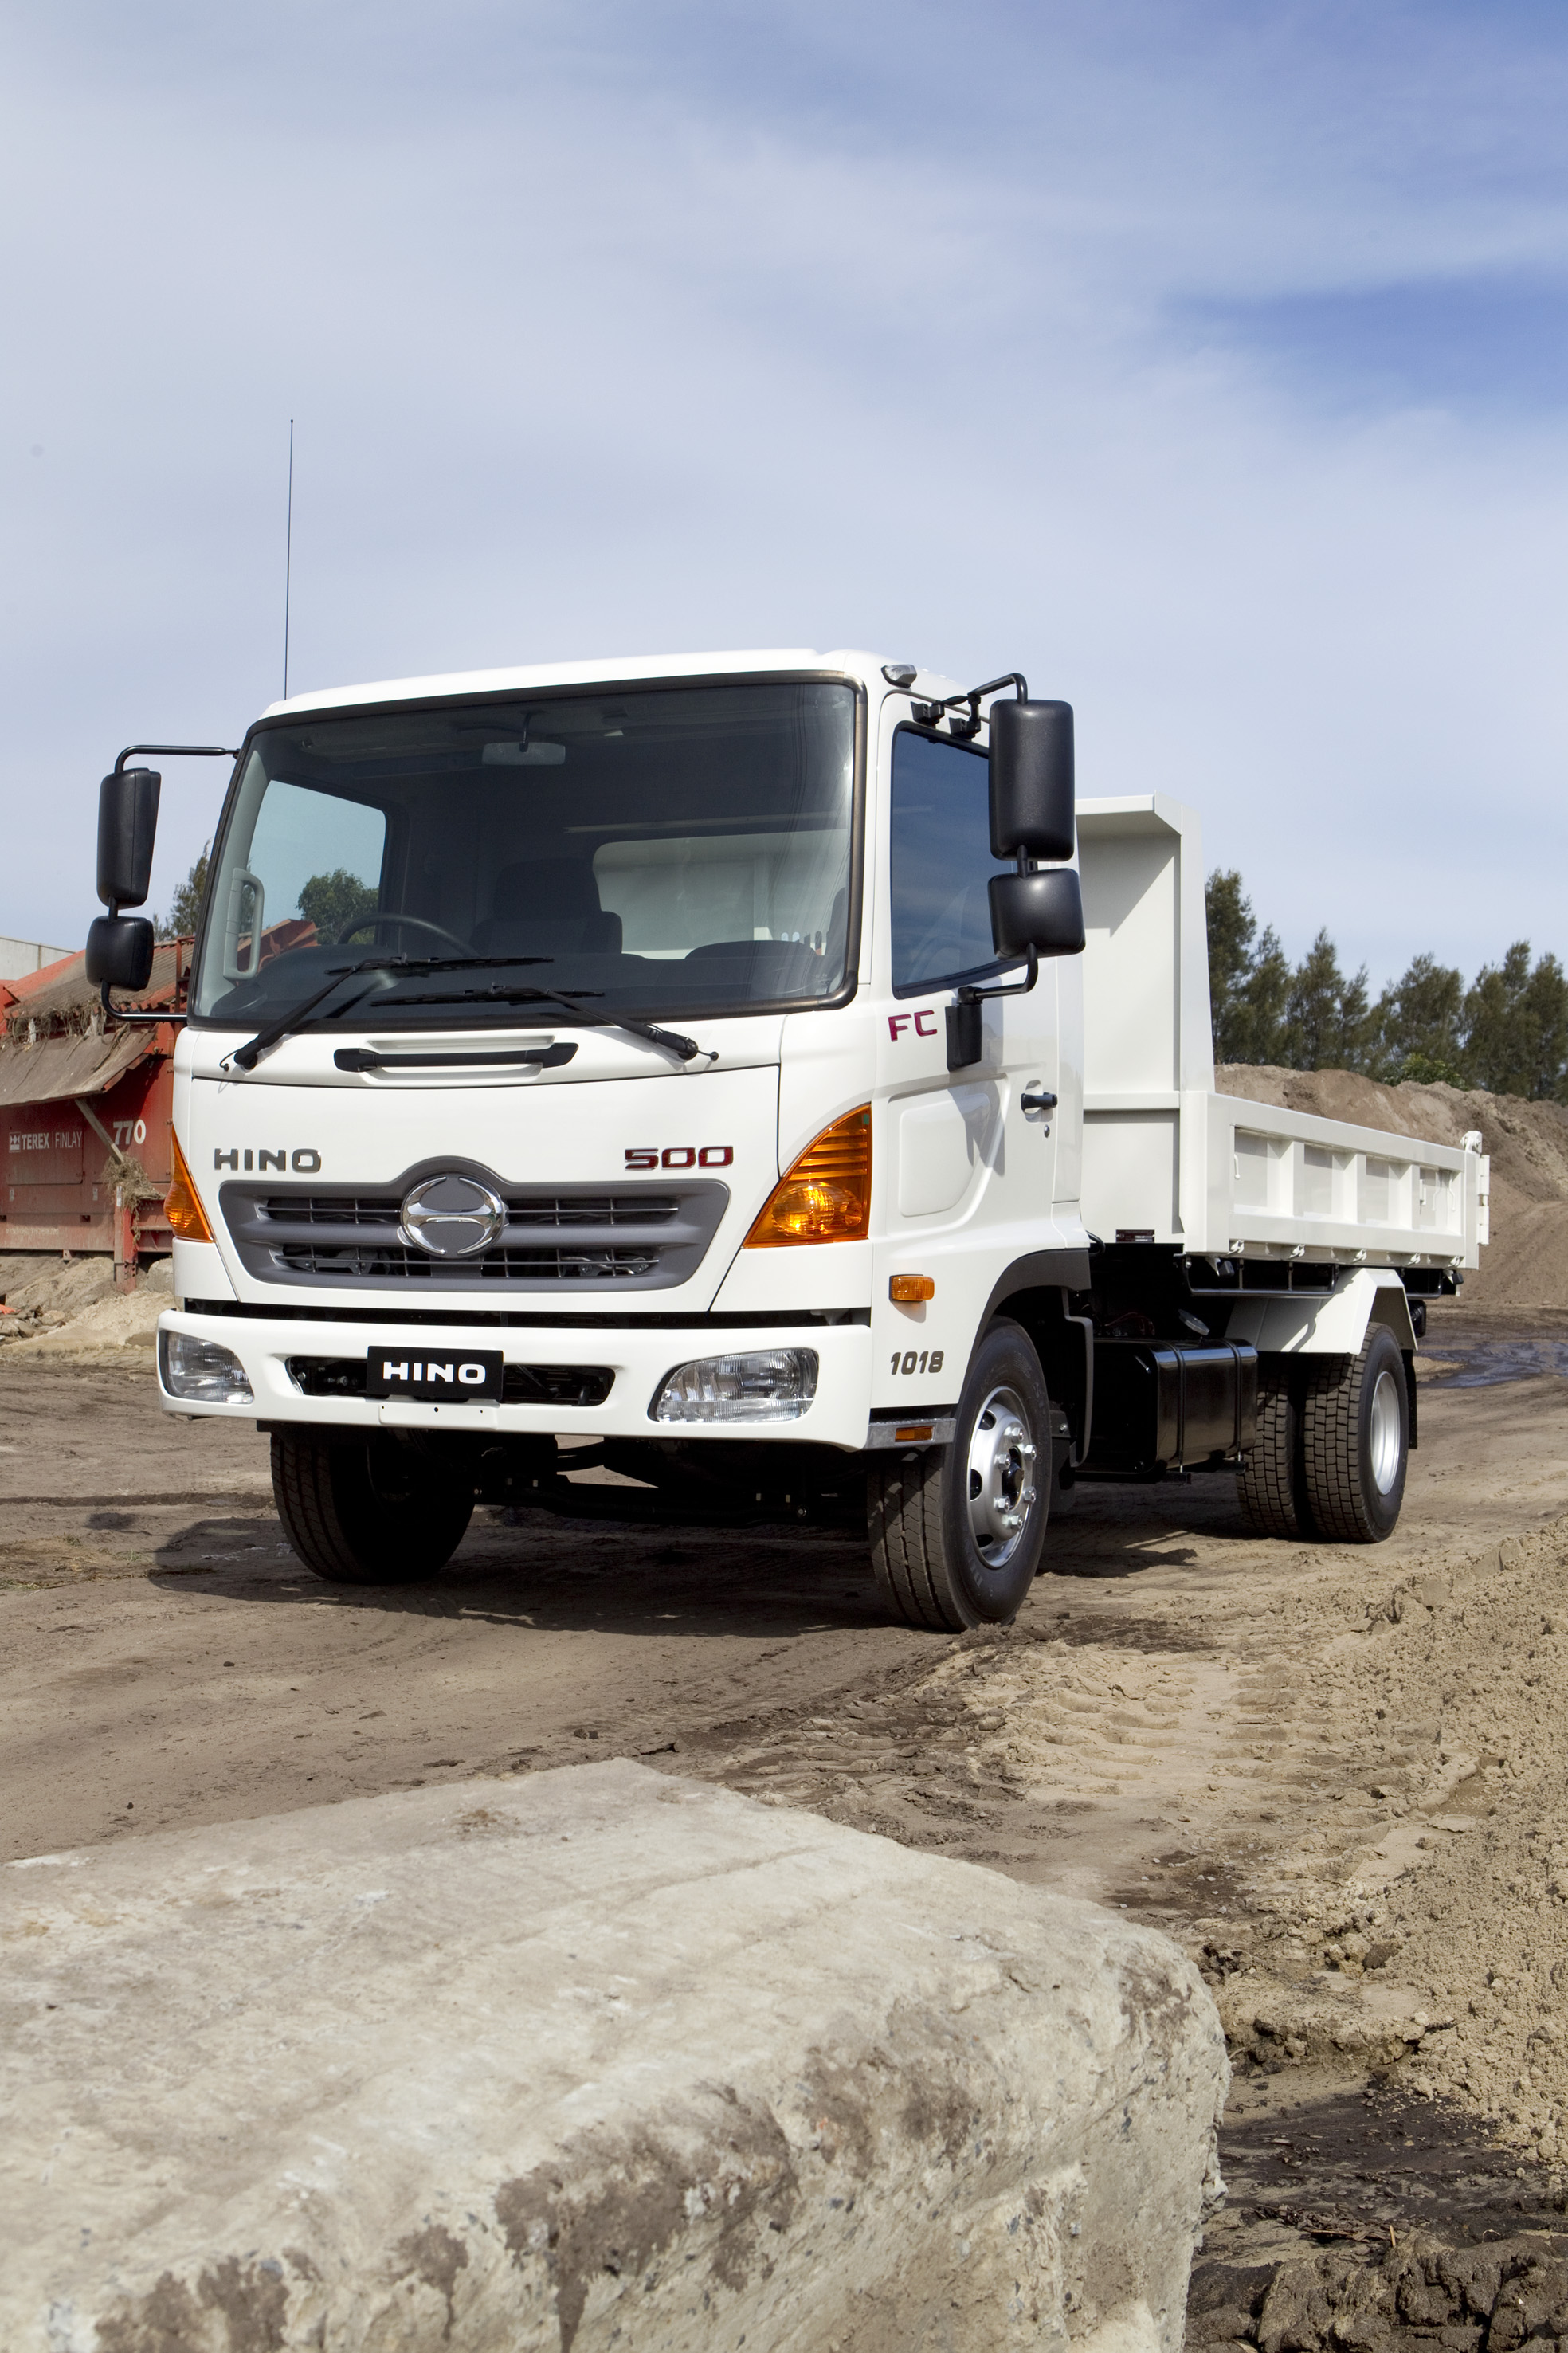 tipper models that continue in the new Euro 5 Hino 500 Series range.